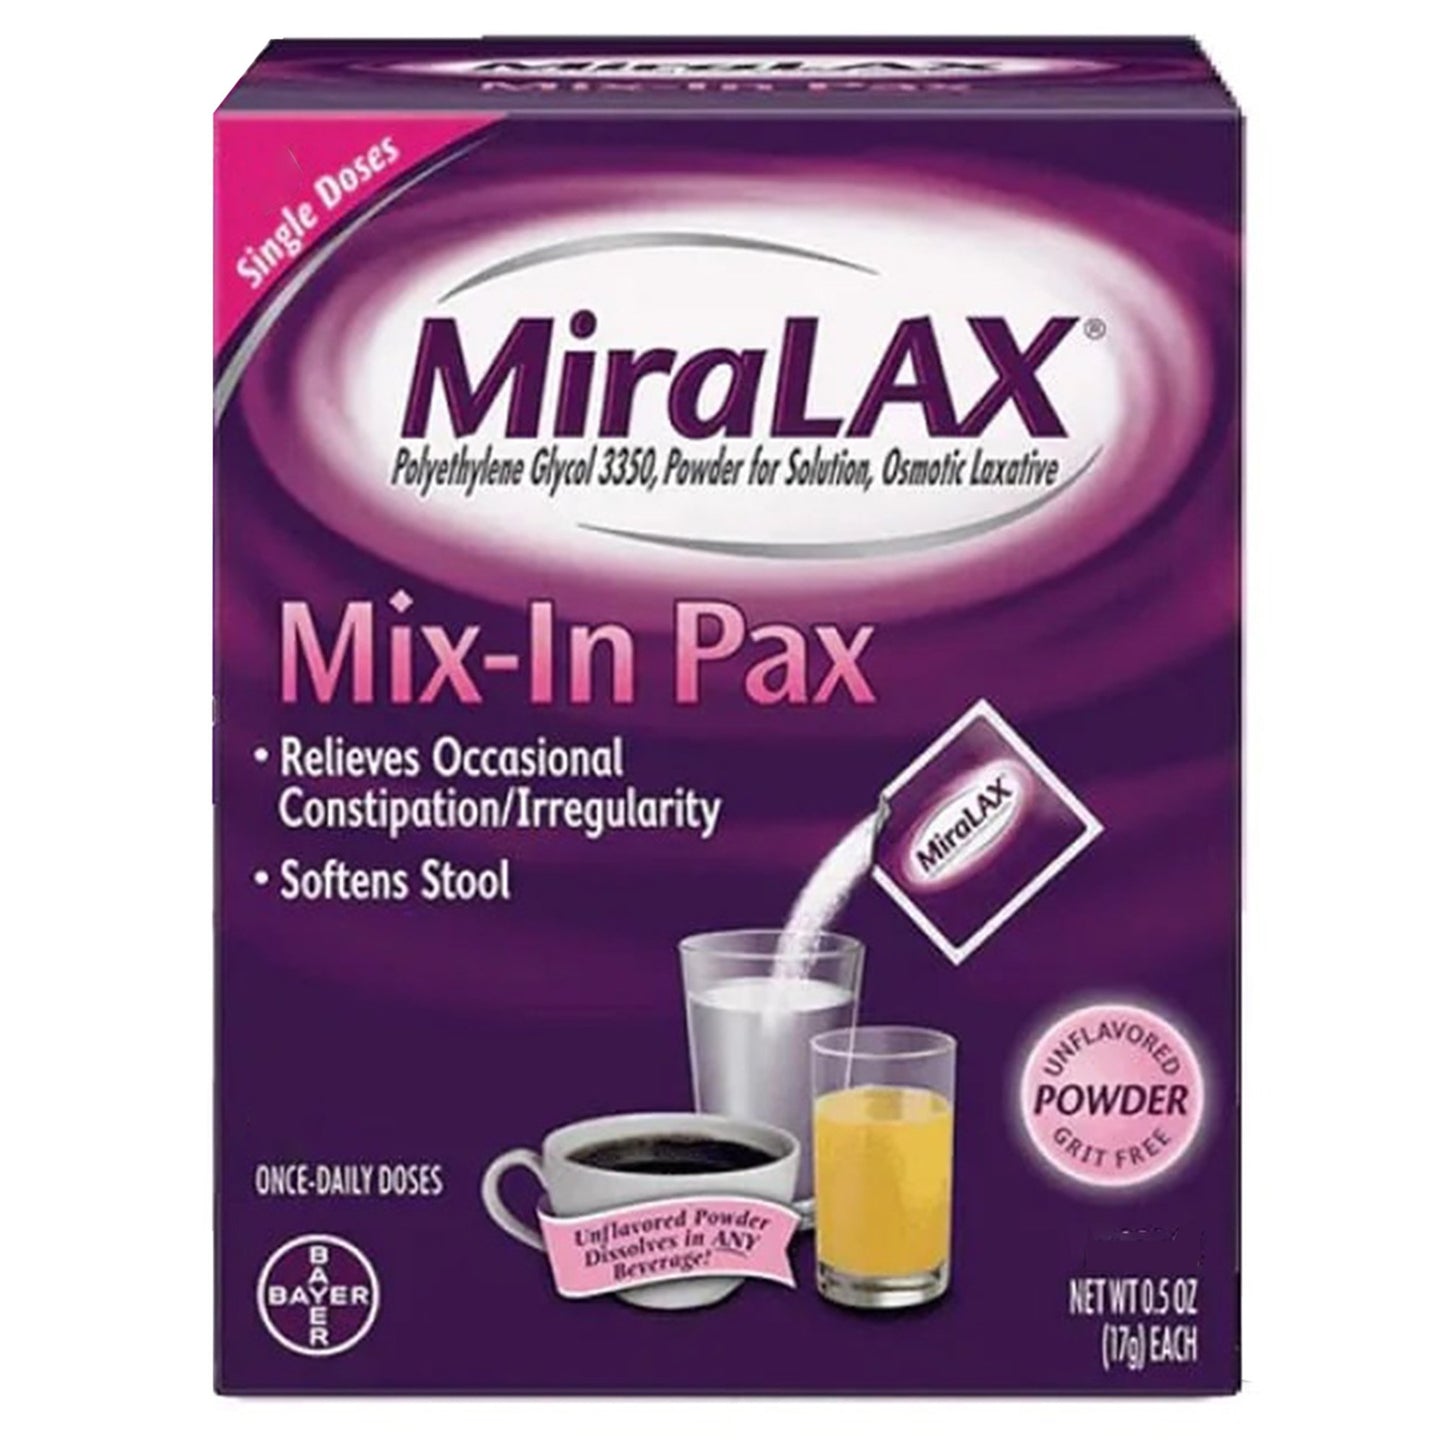 MiraLAX® Mix-In Pax Laxative, Unflavored Single Dose Packets, 24 ct